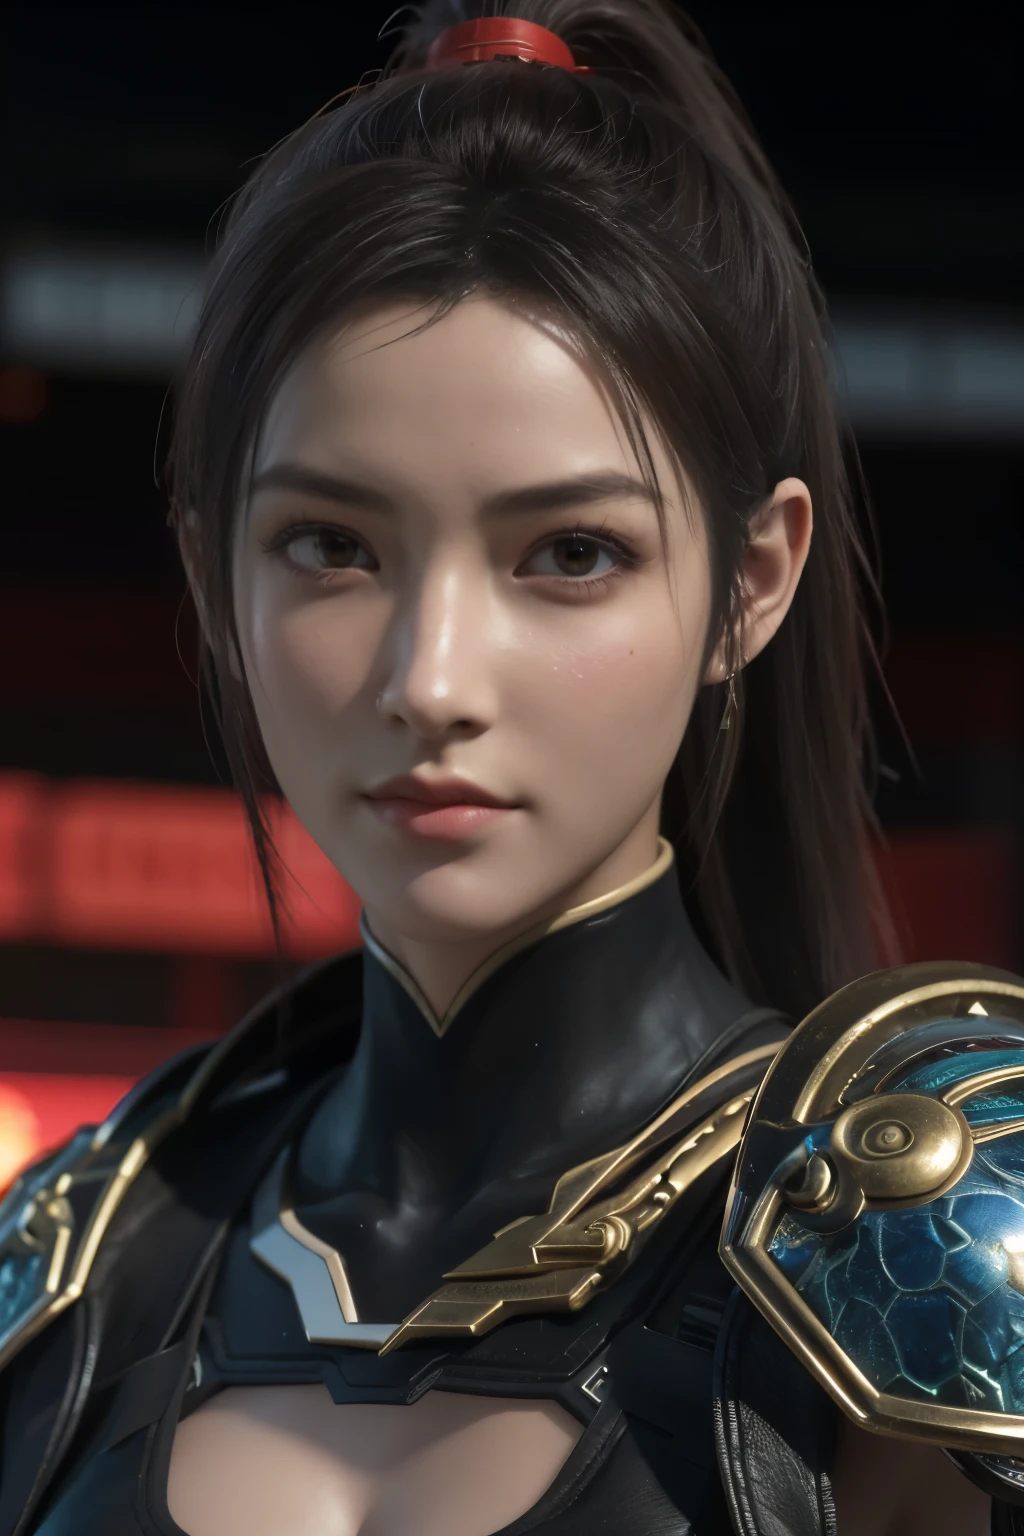 Game art，The best picture quality，Highest resolution，8k，(A bust photograph)，(Portrait)，(Head close-up)，(Rule of thirds)，Unreal Engine 5 rendering works， (The Girl of the Future)，(Female Warrior)， 22-year-old girl，(Female hackers)，(Rainbow hair，Ancient Oriental hairstyle)，((The pupils of the red eyes:1.3))，(A beautiful eye full of detail)，(Big breasts)，(Eye shadow)，Elegant and charming，indifferent，((anger))，(Cyberpunk jacket full of futuristic look，Joint Armor，There are exquisite Chinese patterns on the clothes，A flash of jewellery)，Cyberpunk Characters，Future Style， Photo poses，City background，Movie lights，Ray tracing，Game CG，((3D Unreal Engine))，oc rendering reflection pattern